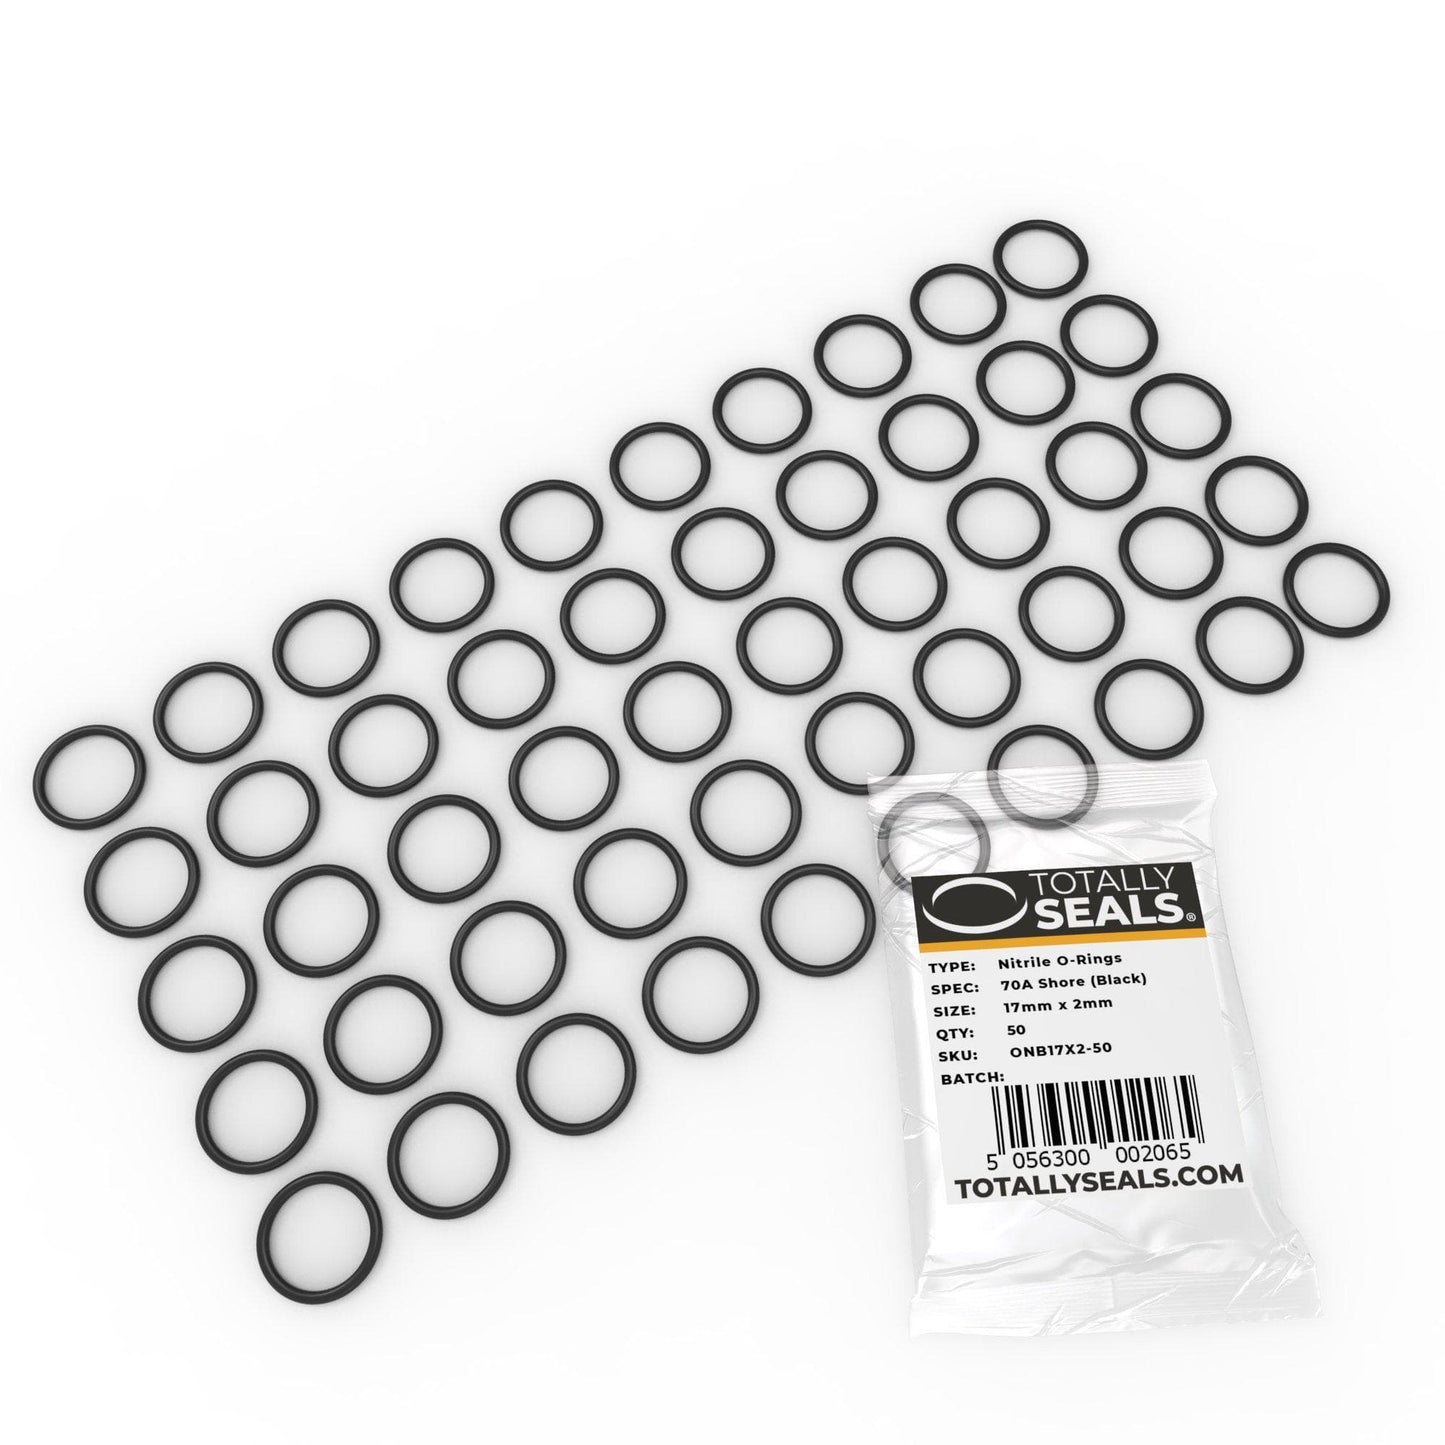 17mm x 2mm (21mm OD) Nitrile O-Rings - Totally Seals®